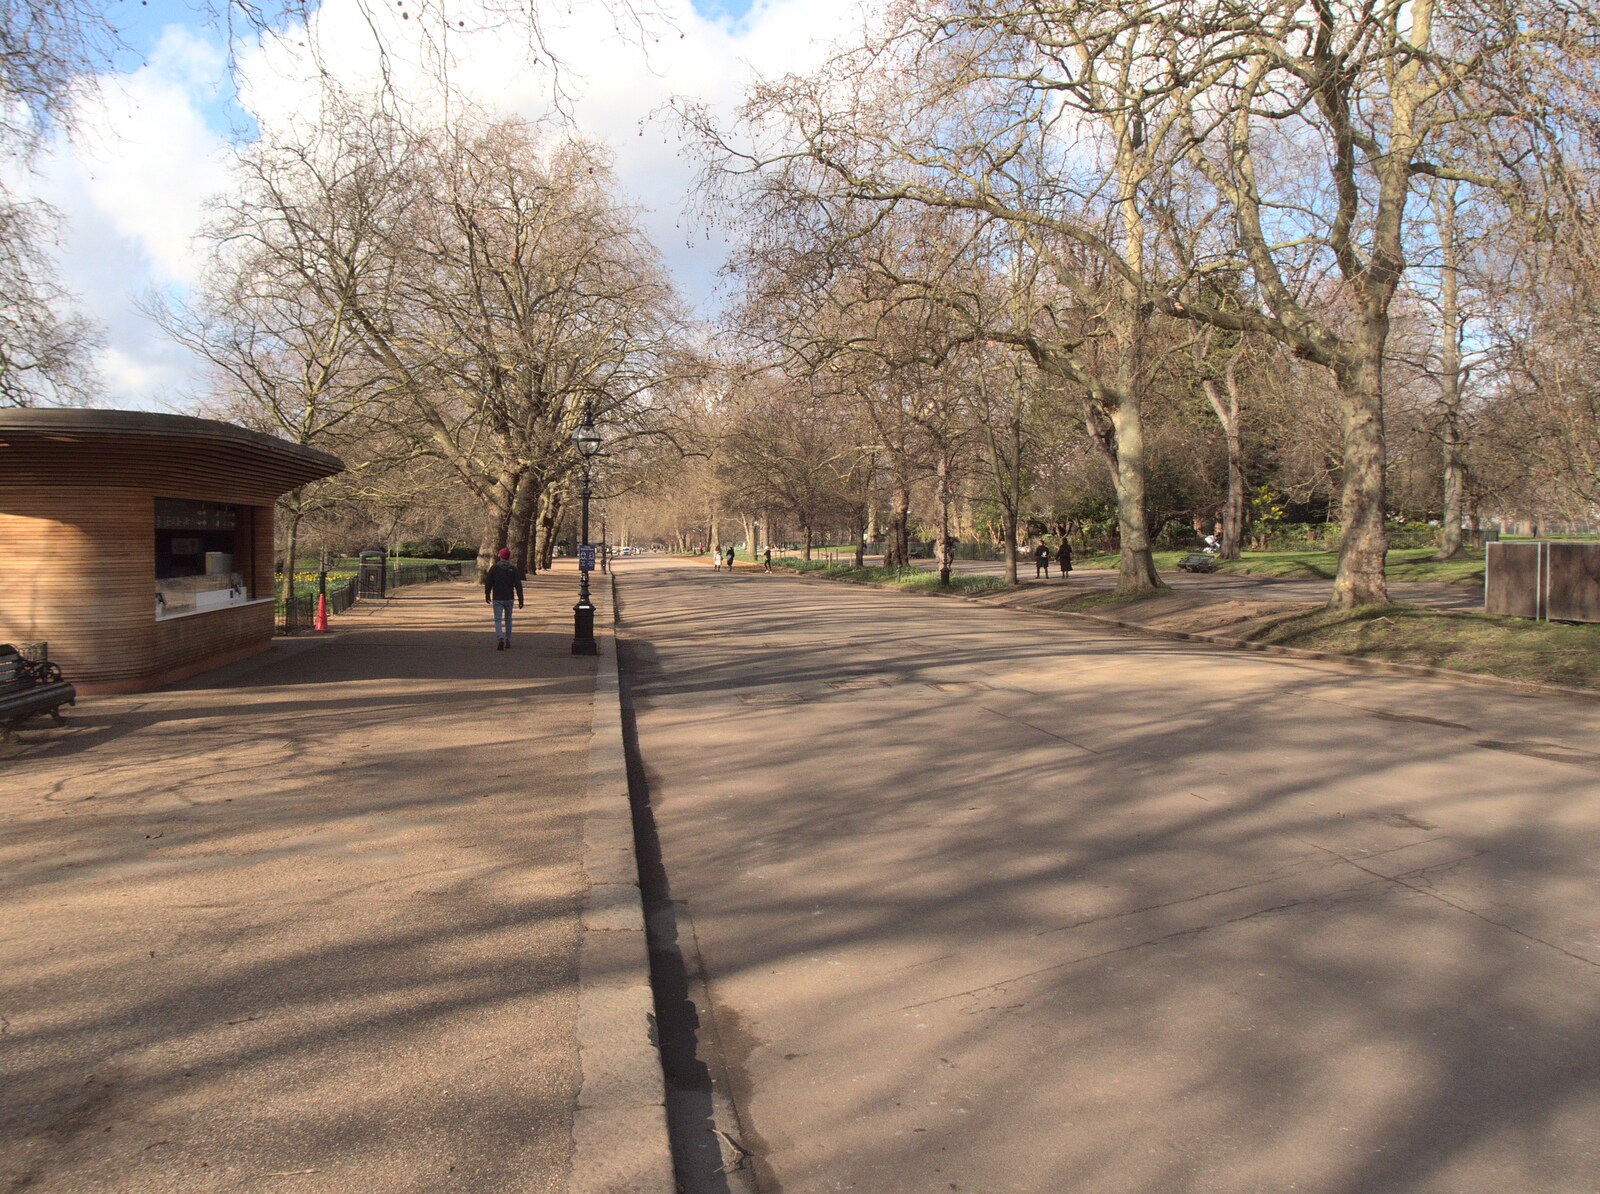 Serpentine Road in Hyde Park from The Last Trip to the SwiftKey Office, Paddington, London - 23rd February 2022